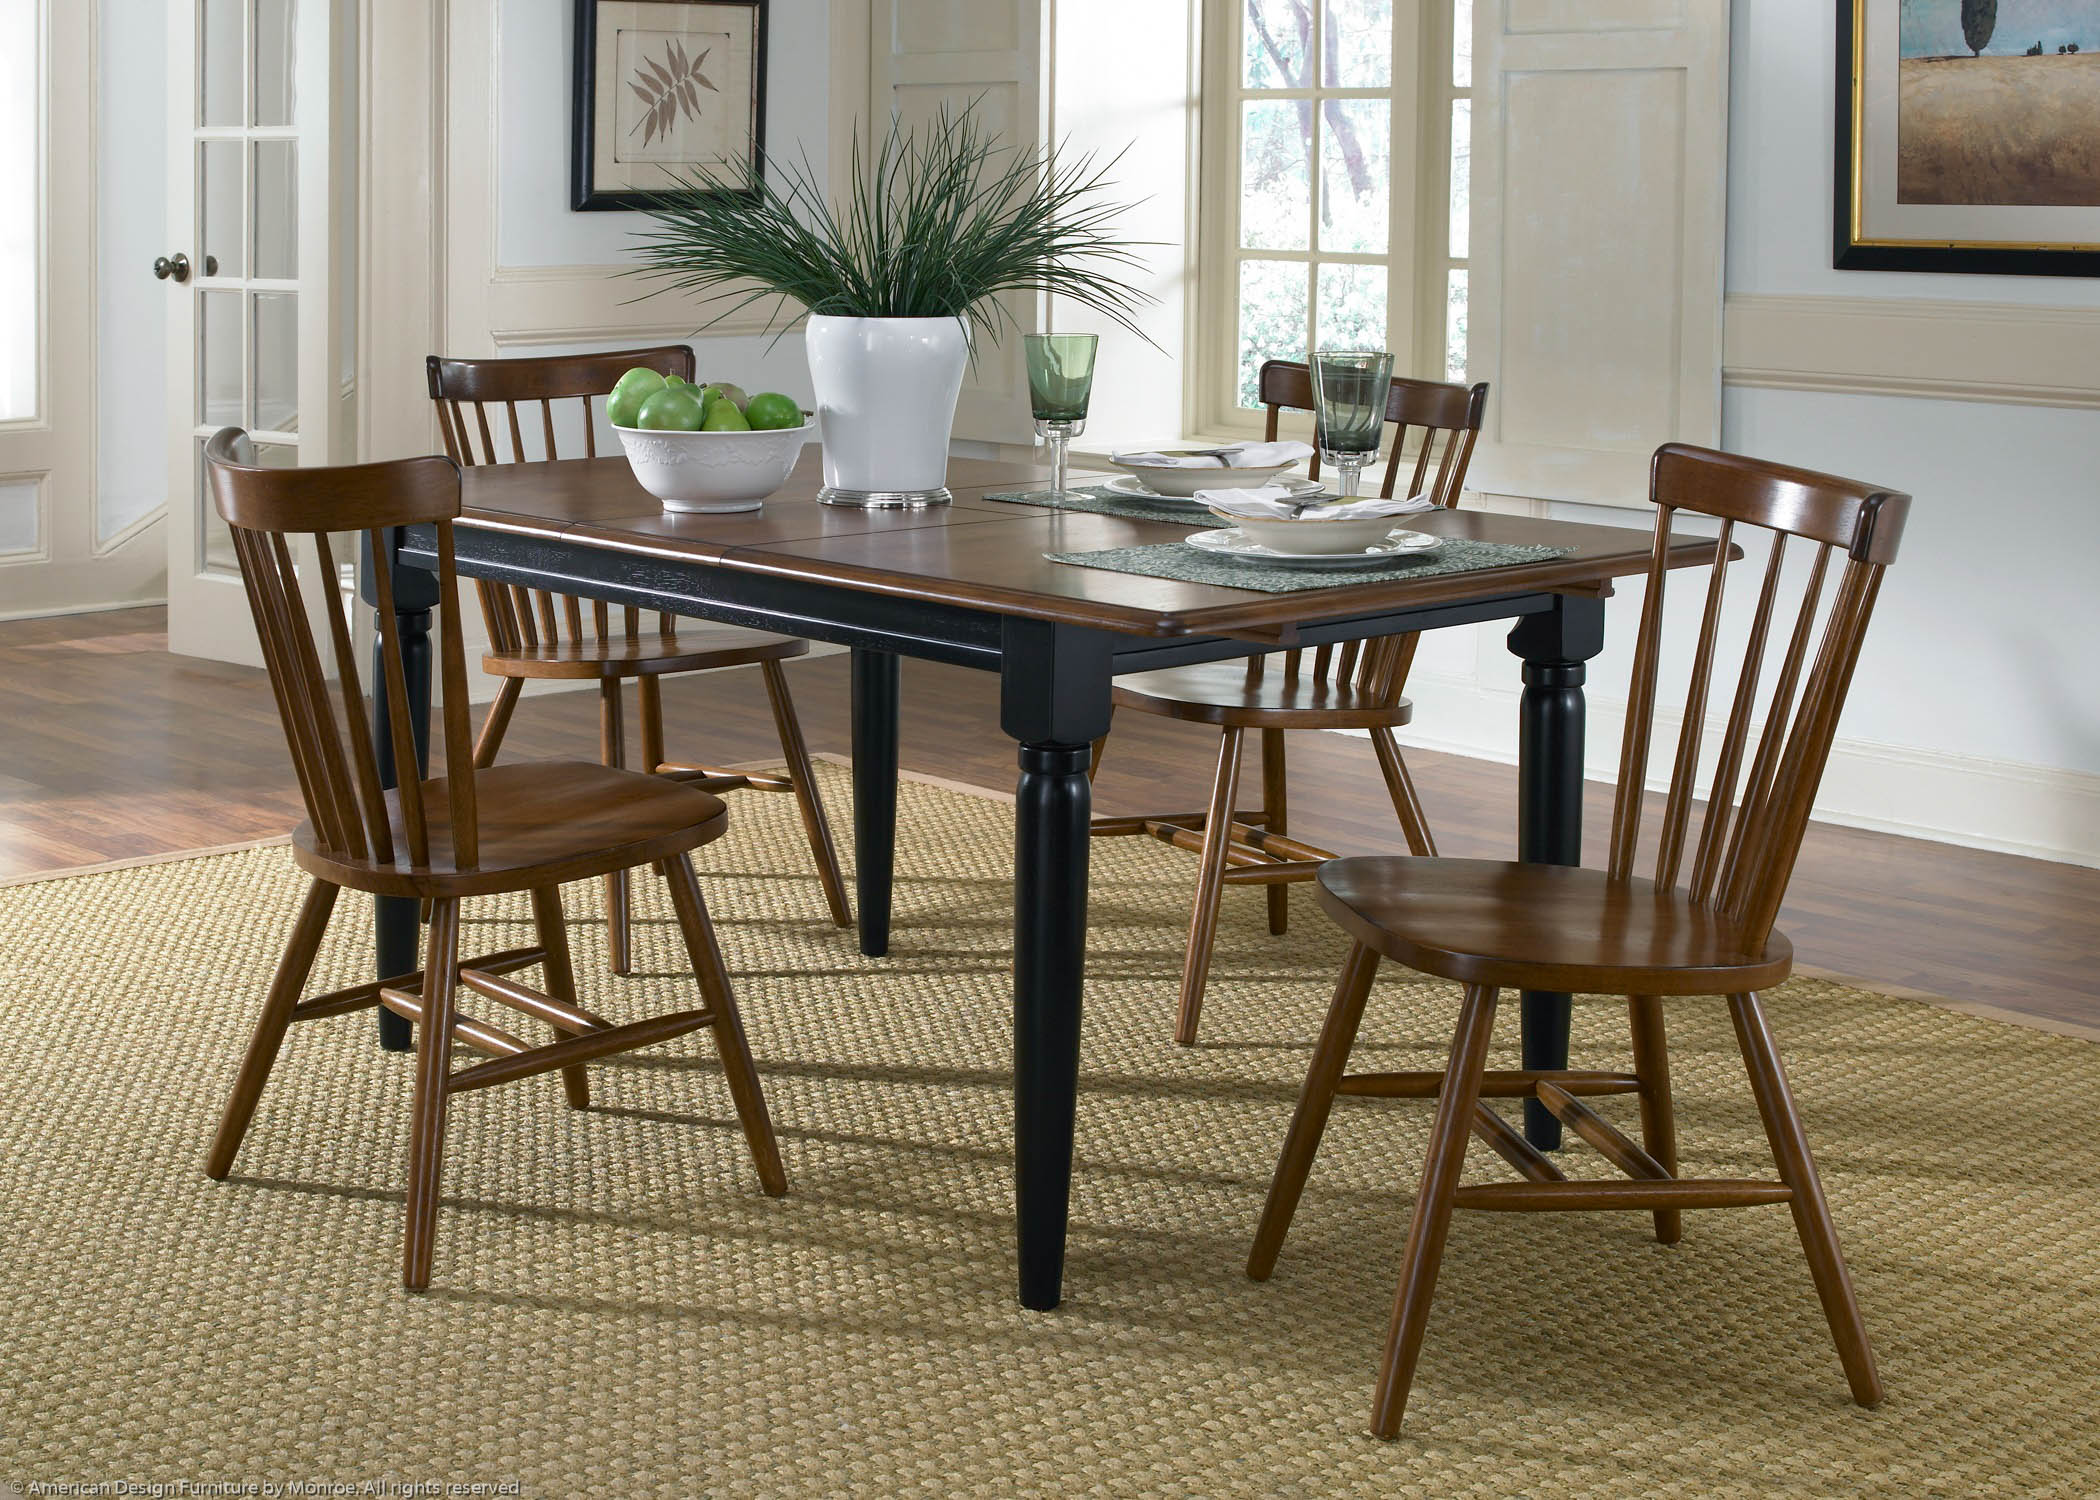 Nantucket Casual Table Pic 7 (Heading Butterfly Leaf Table (Black & Tobacco)